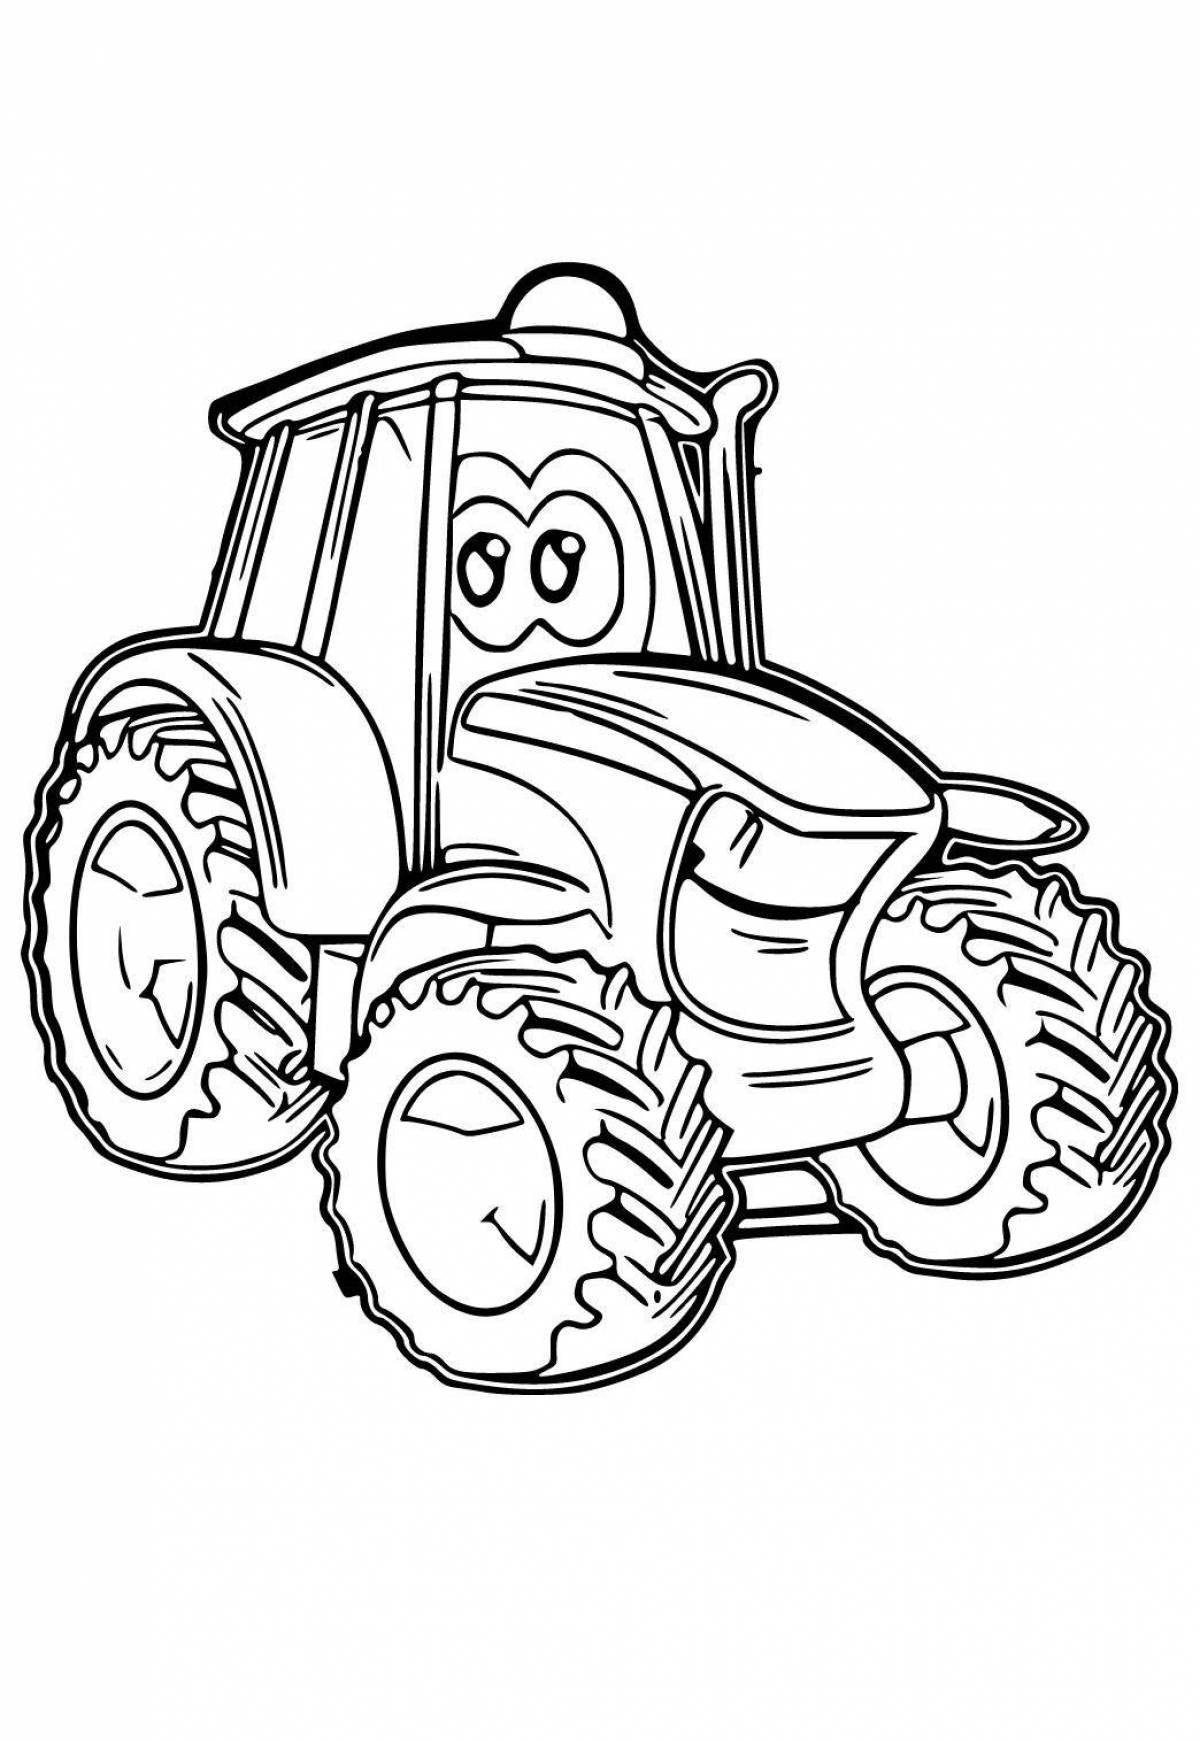 Bright drawing of a tractor for children